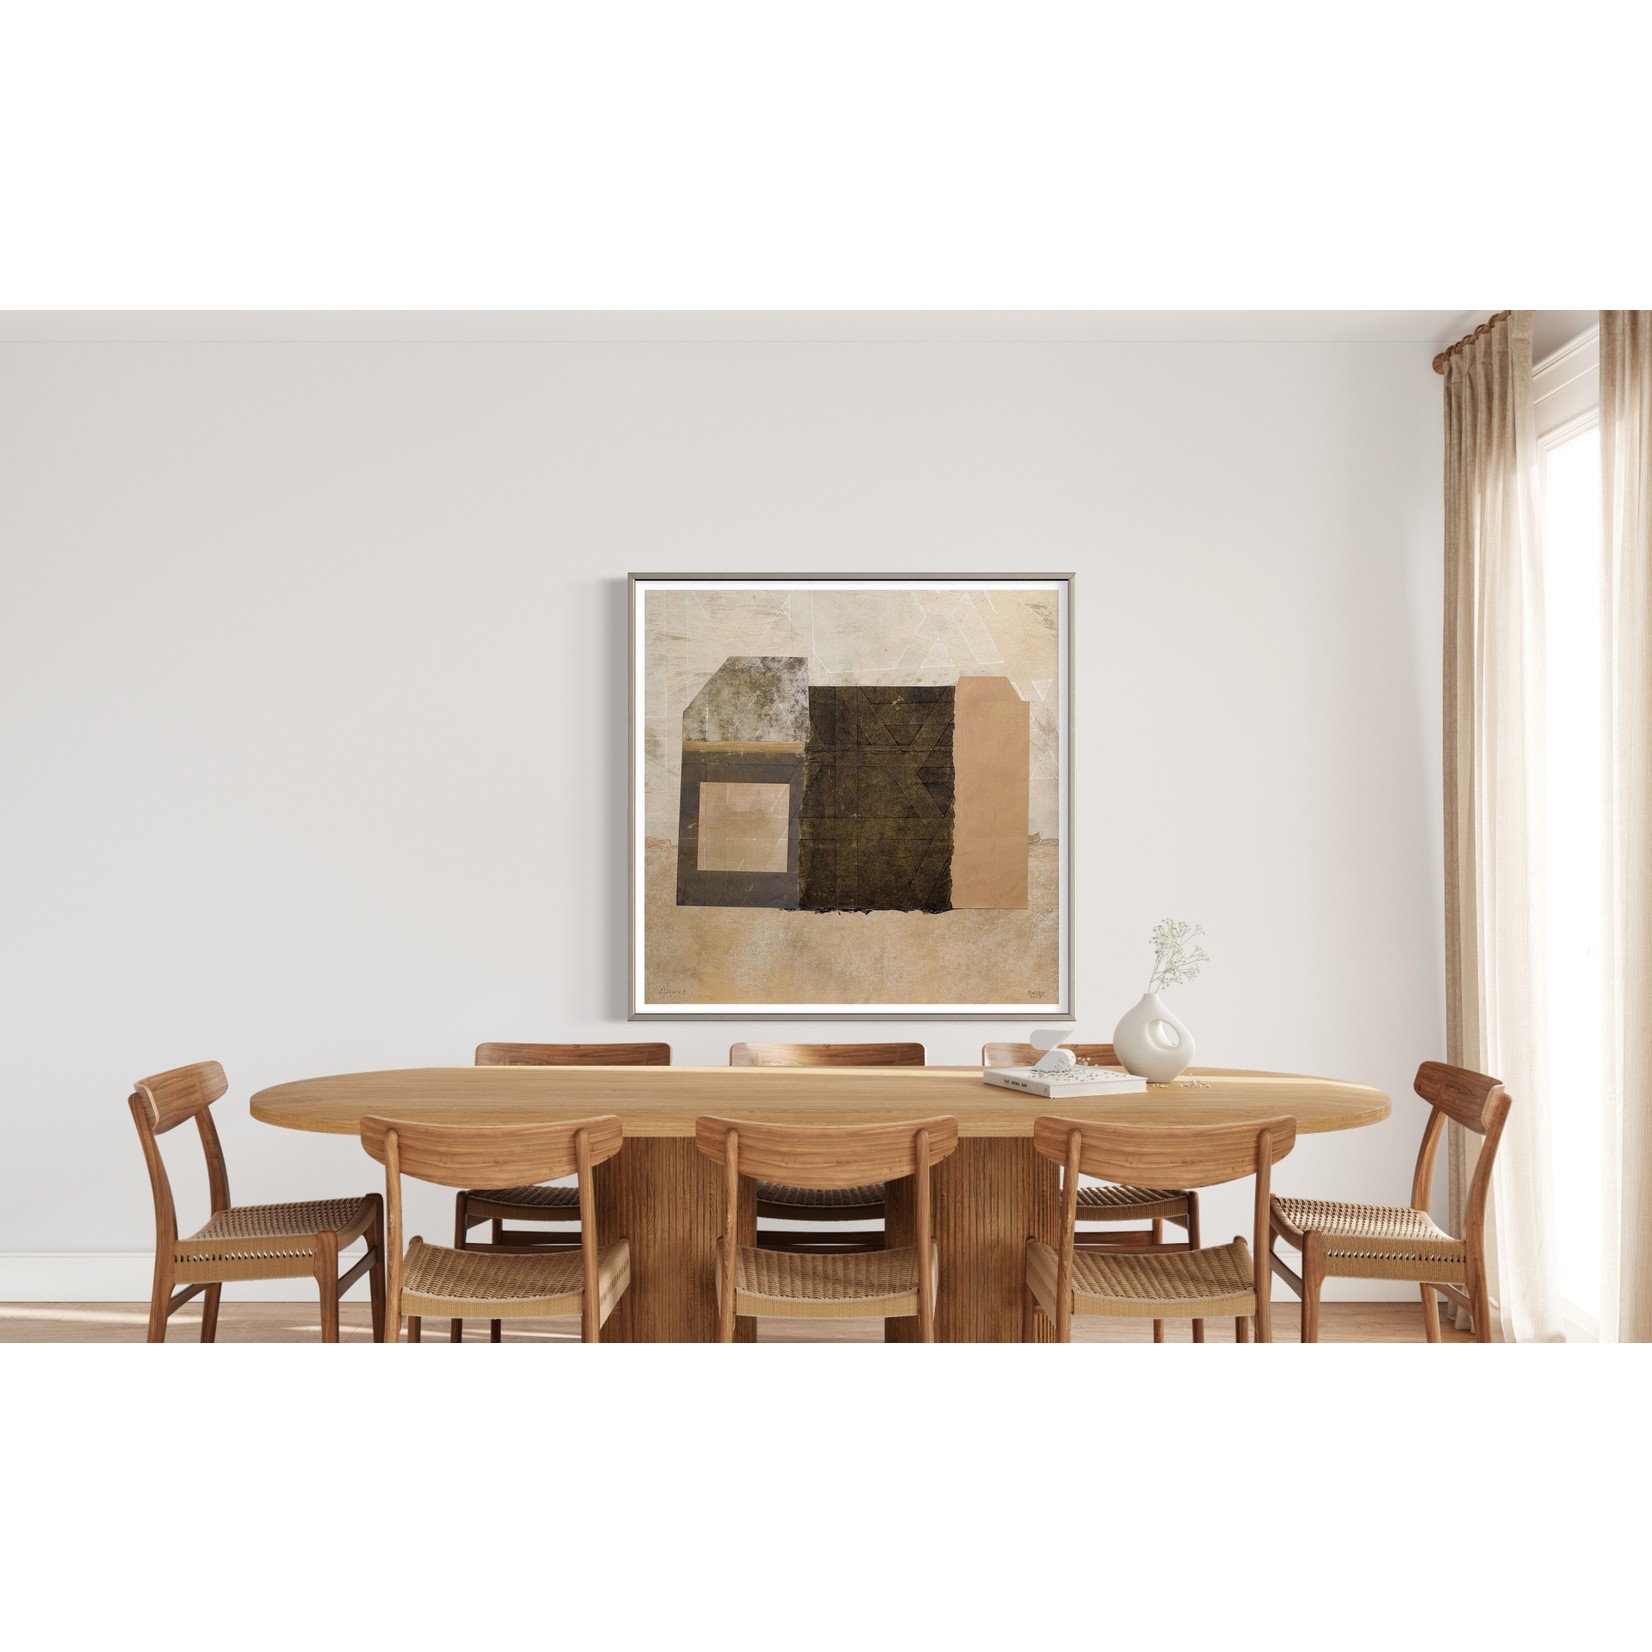 Framed Print on Rag Paper: Home by Lidia Beiza